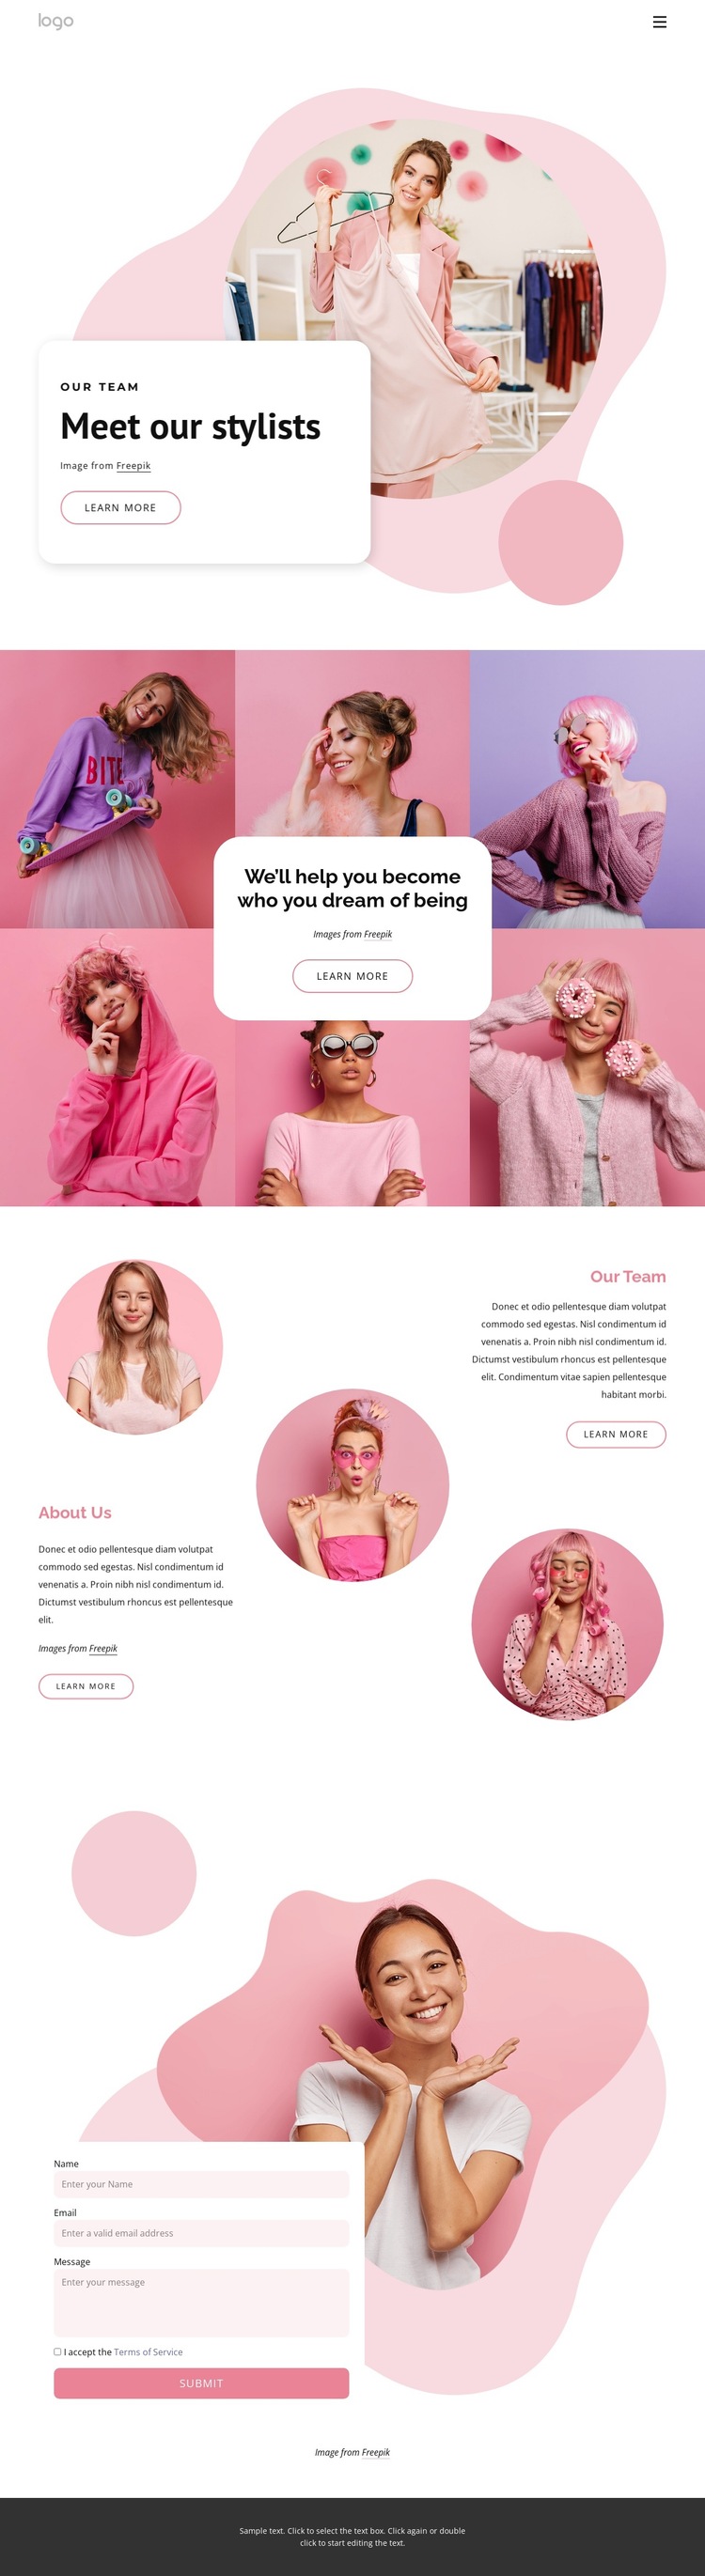 Meet our stylists HTML5 Template